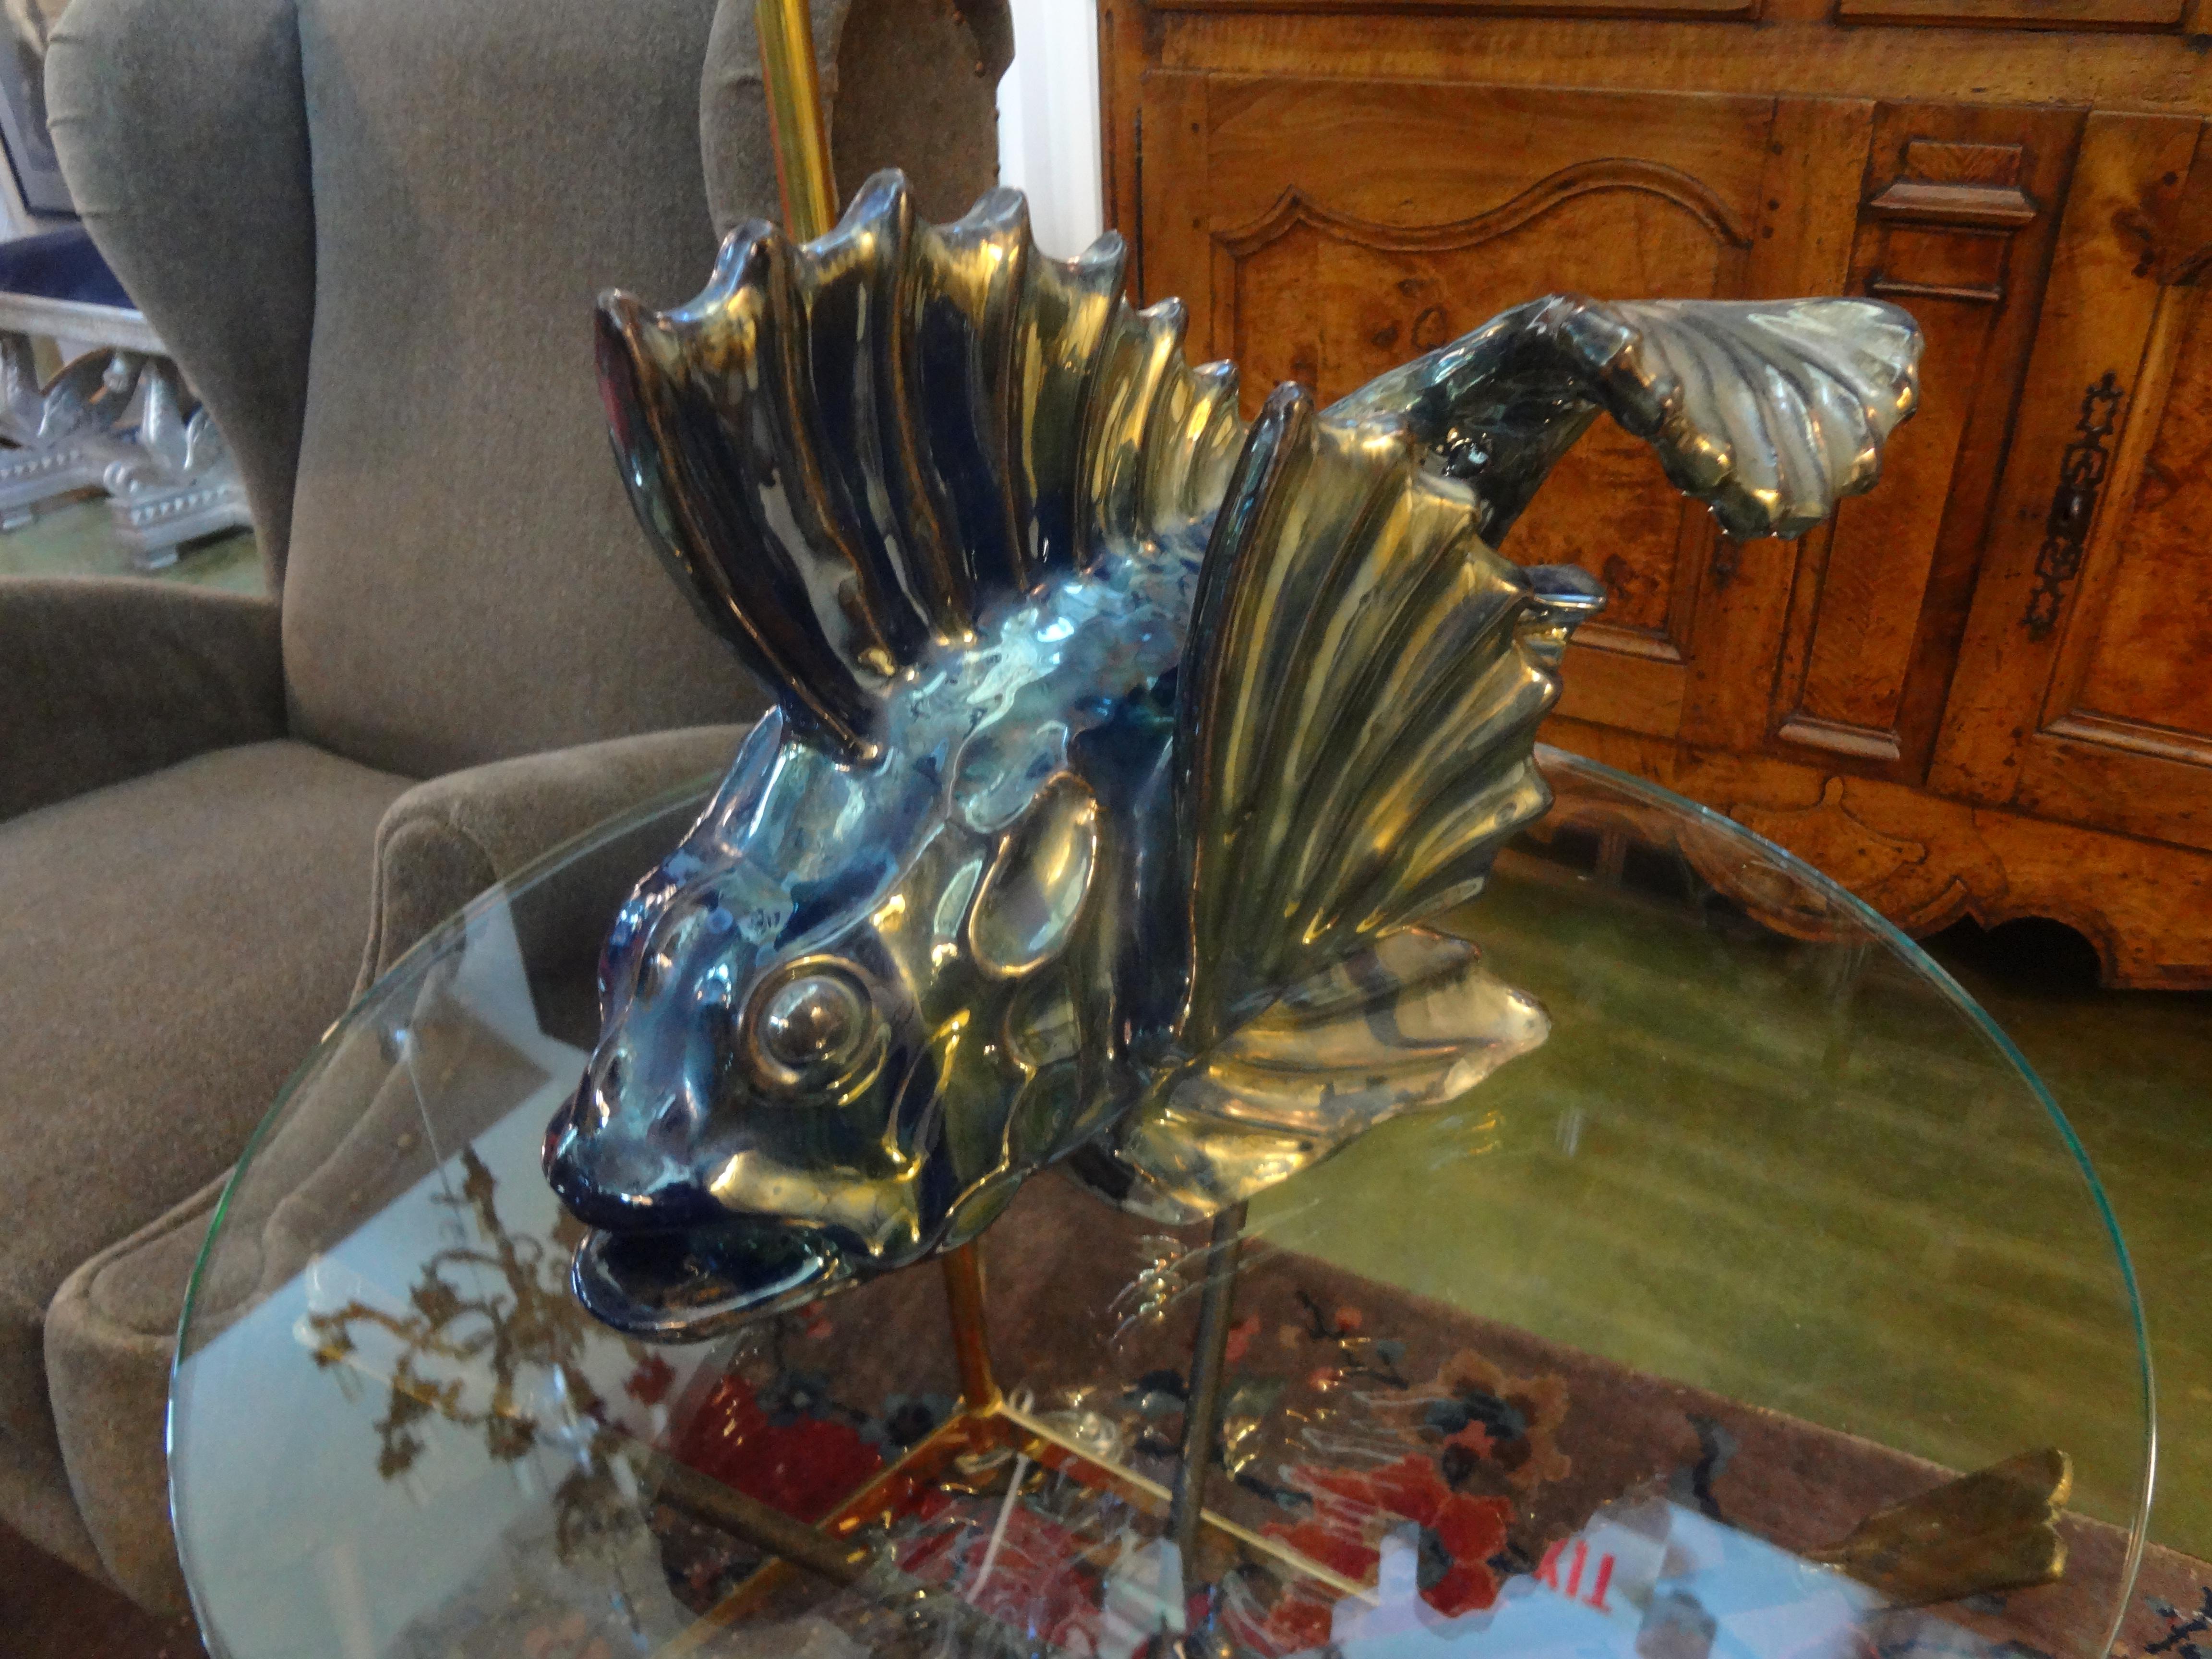 Interesting antique French iridescent glazed terracotta fish sculpture. This French fish figure is executed in iridescent tones of blue and green with beautiful movement. This French Art Deco stylized fish dates to the 1920s. The glaze is similar to